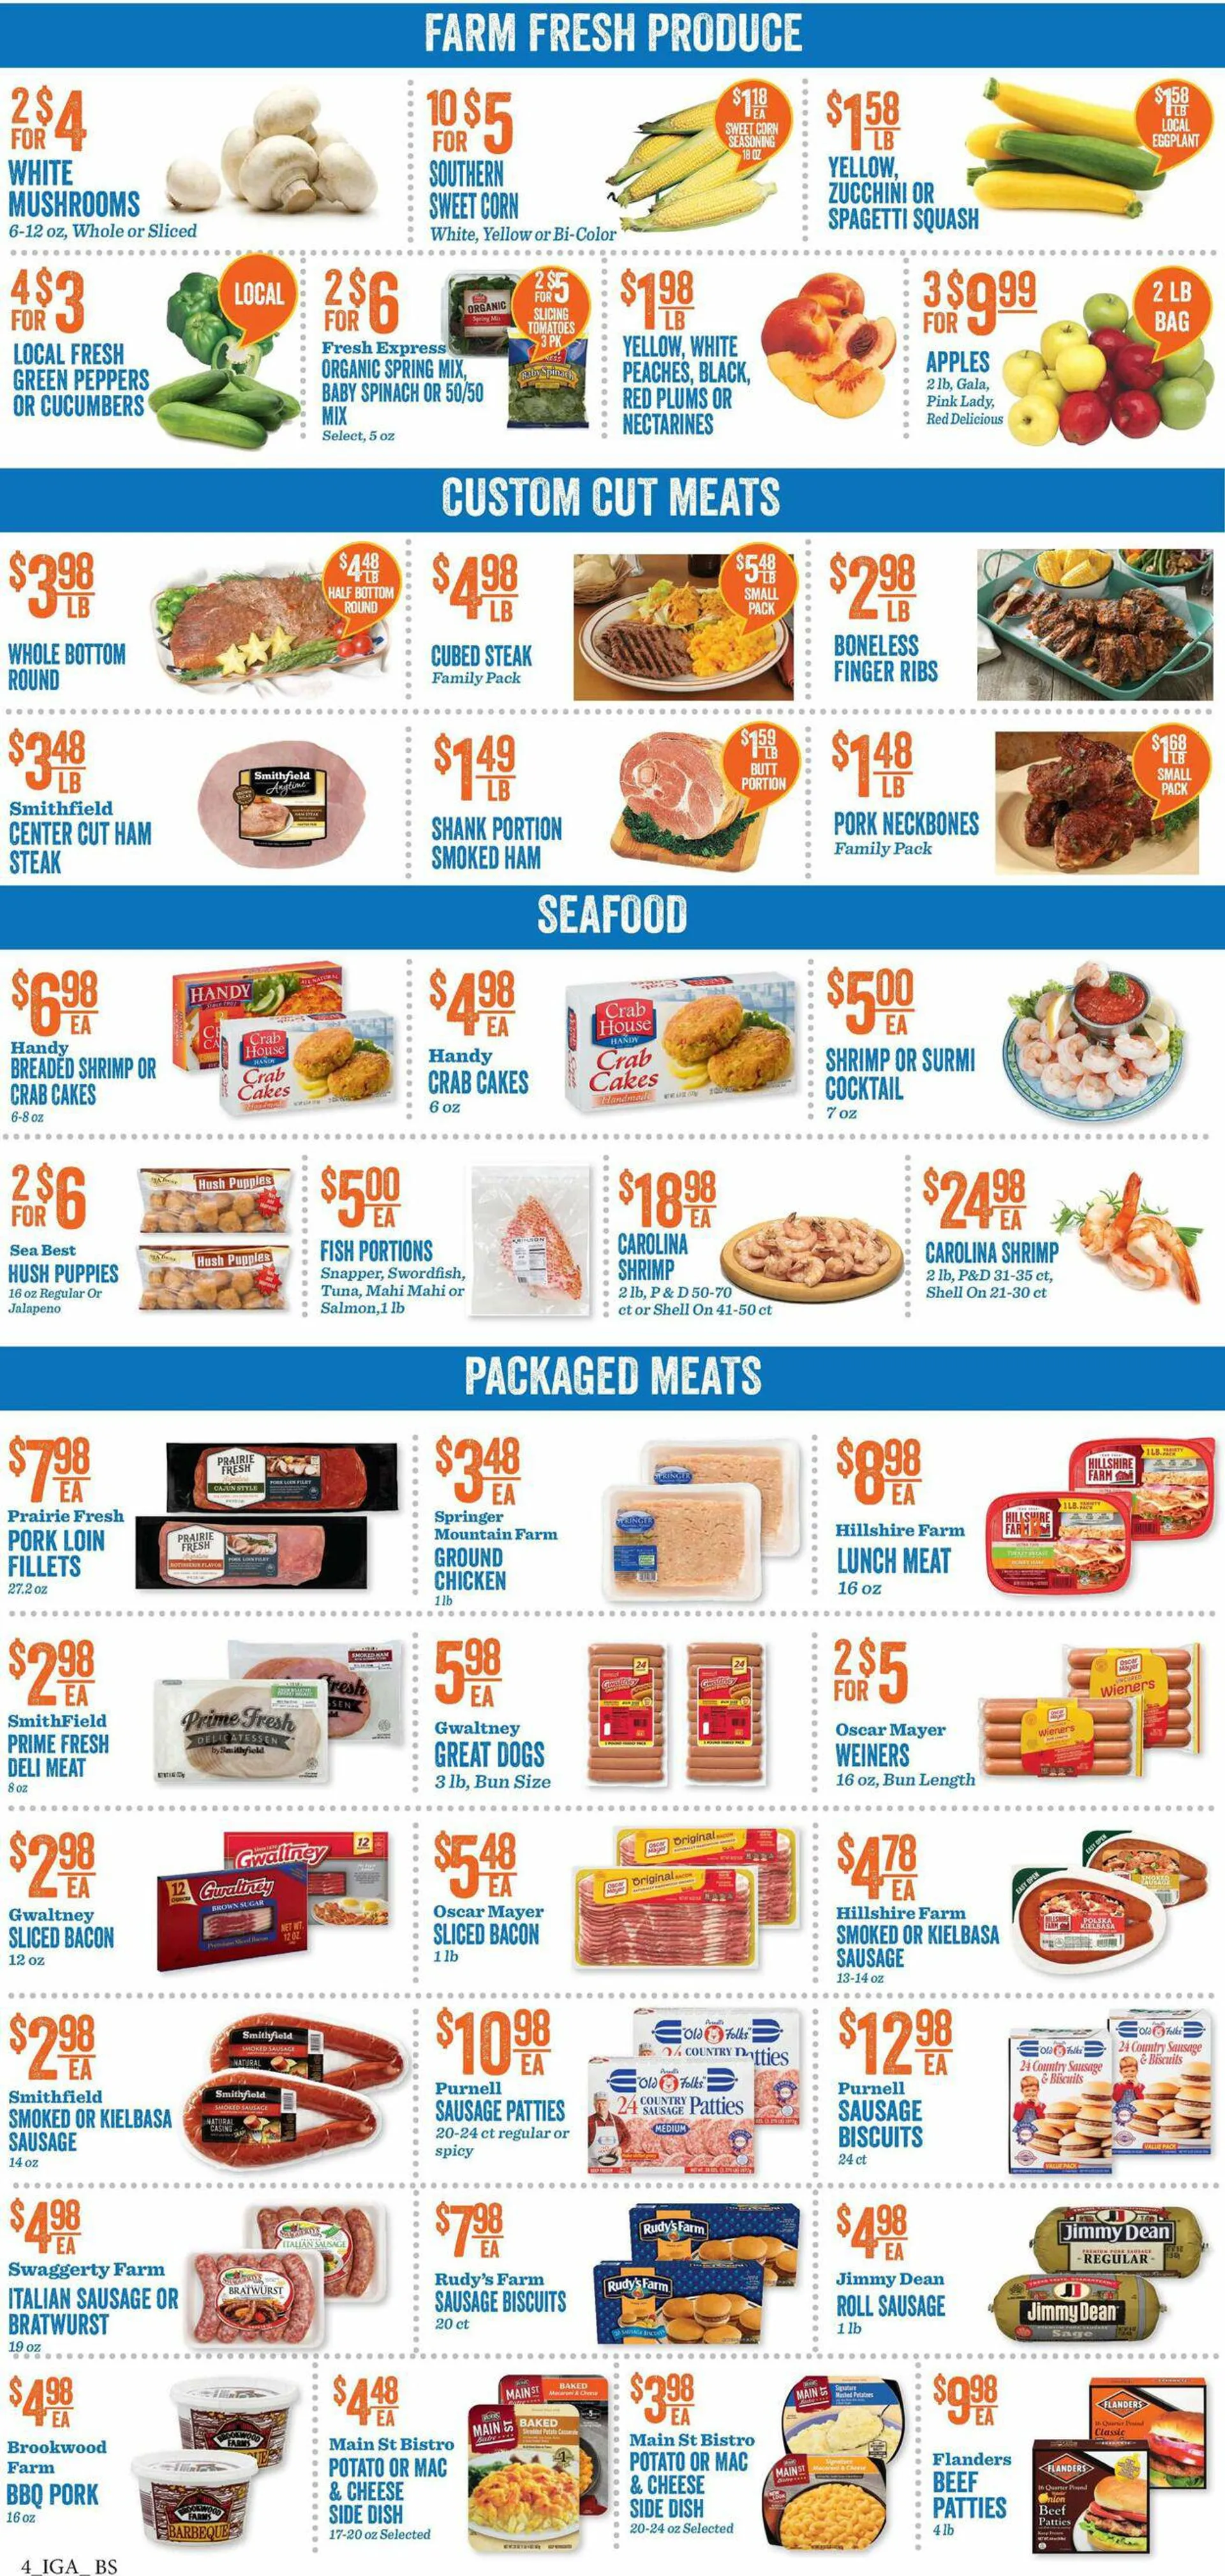 KJ´s Market Current weekly ad - 4